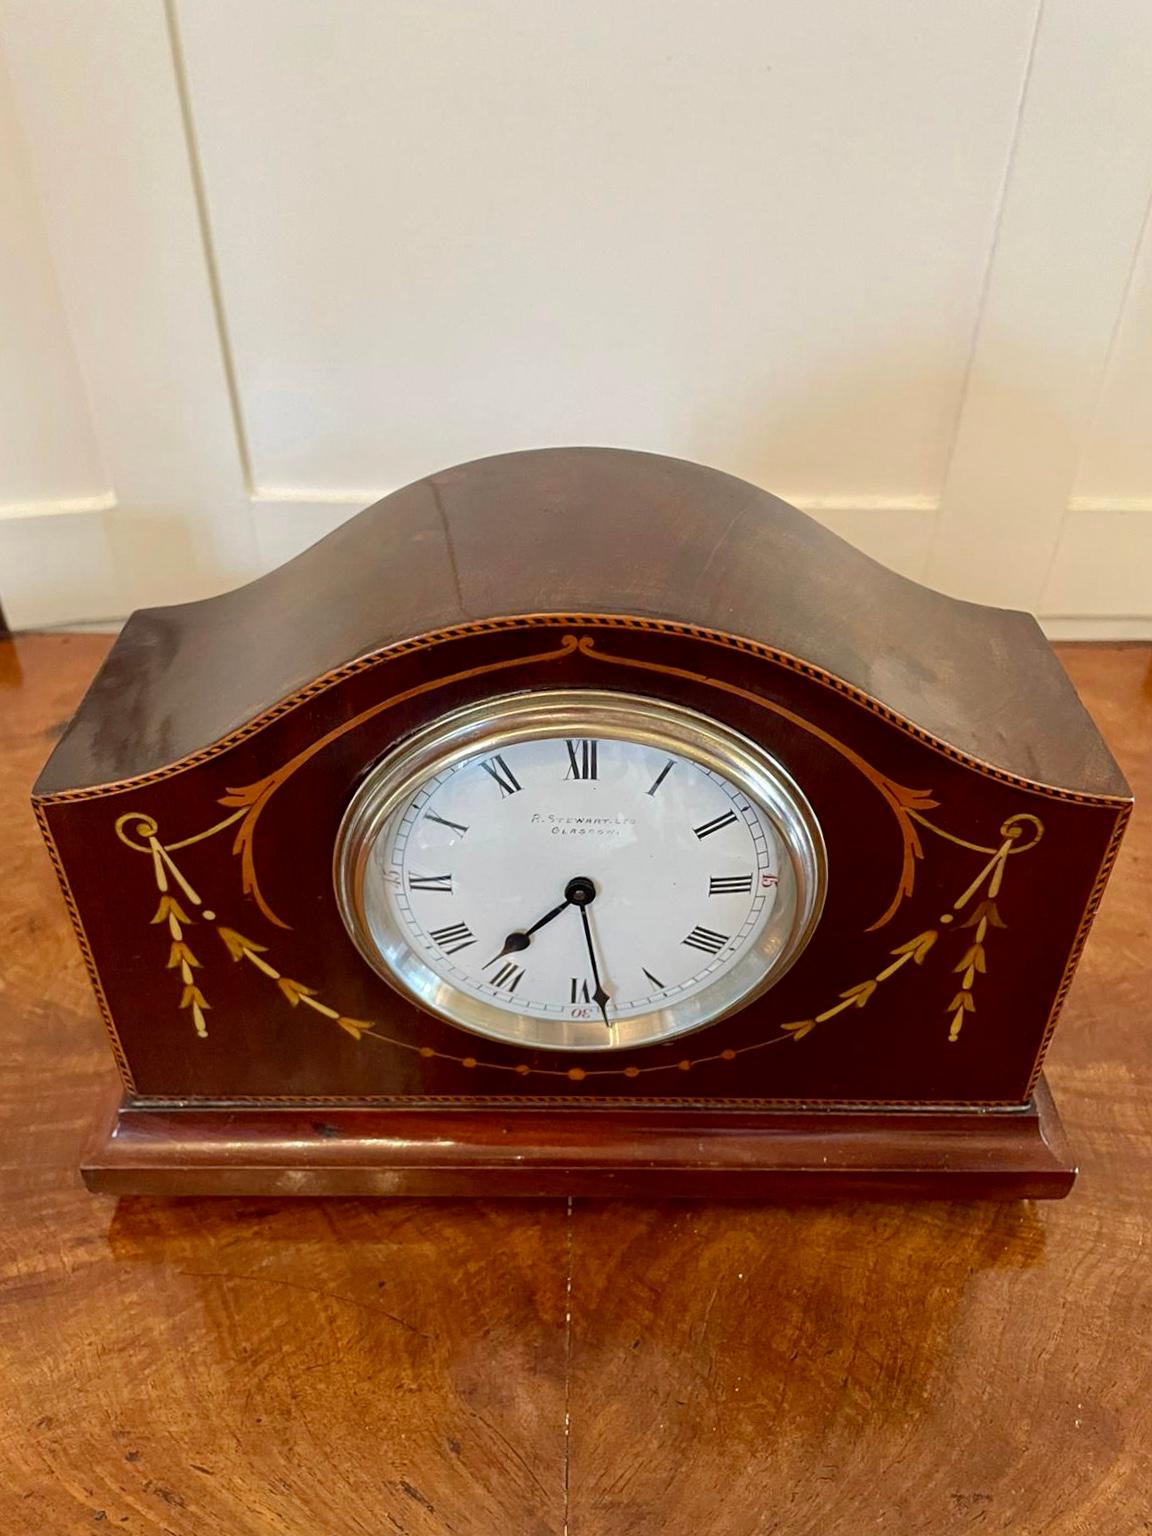 Quality antique inlaid mahogany eight day desktop clock by R Stewart of Glasgow having a quality mahogany case with a shaped top beautifully inlaid with harebells and swags to the front, enamelled dial with original hands and brass bezel, eight day